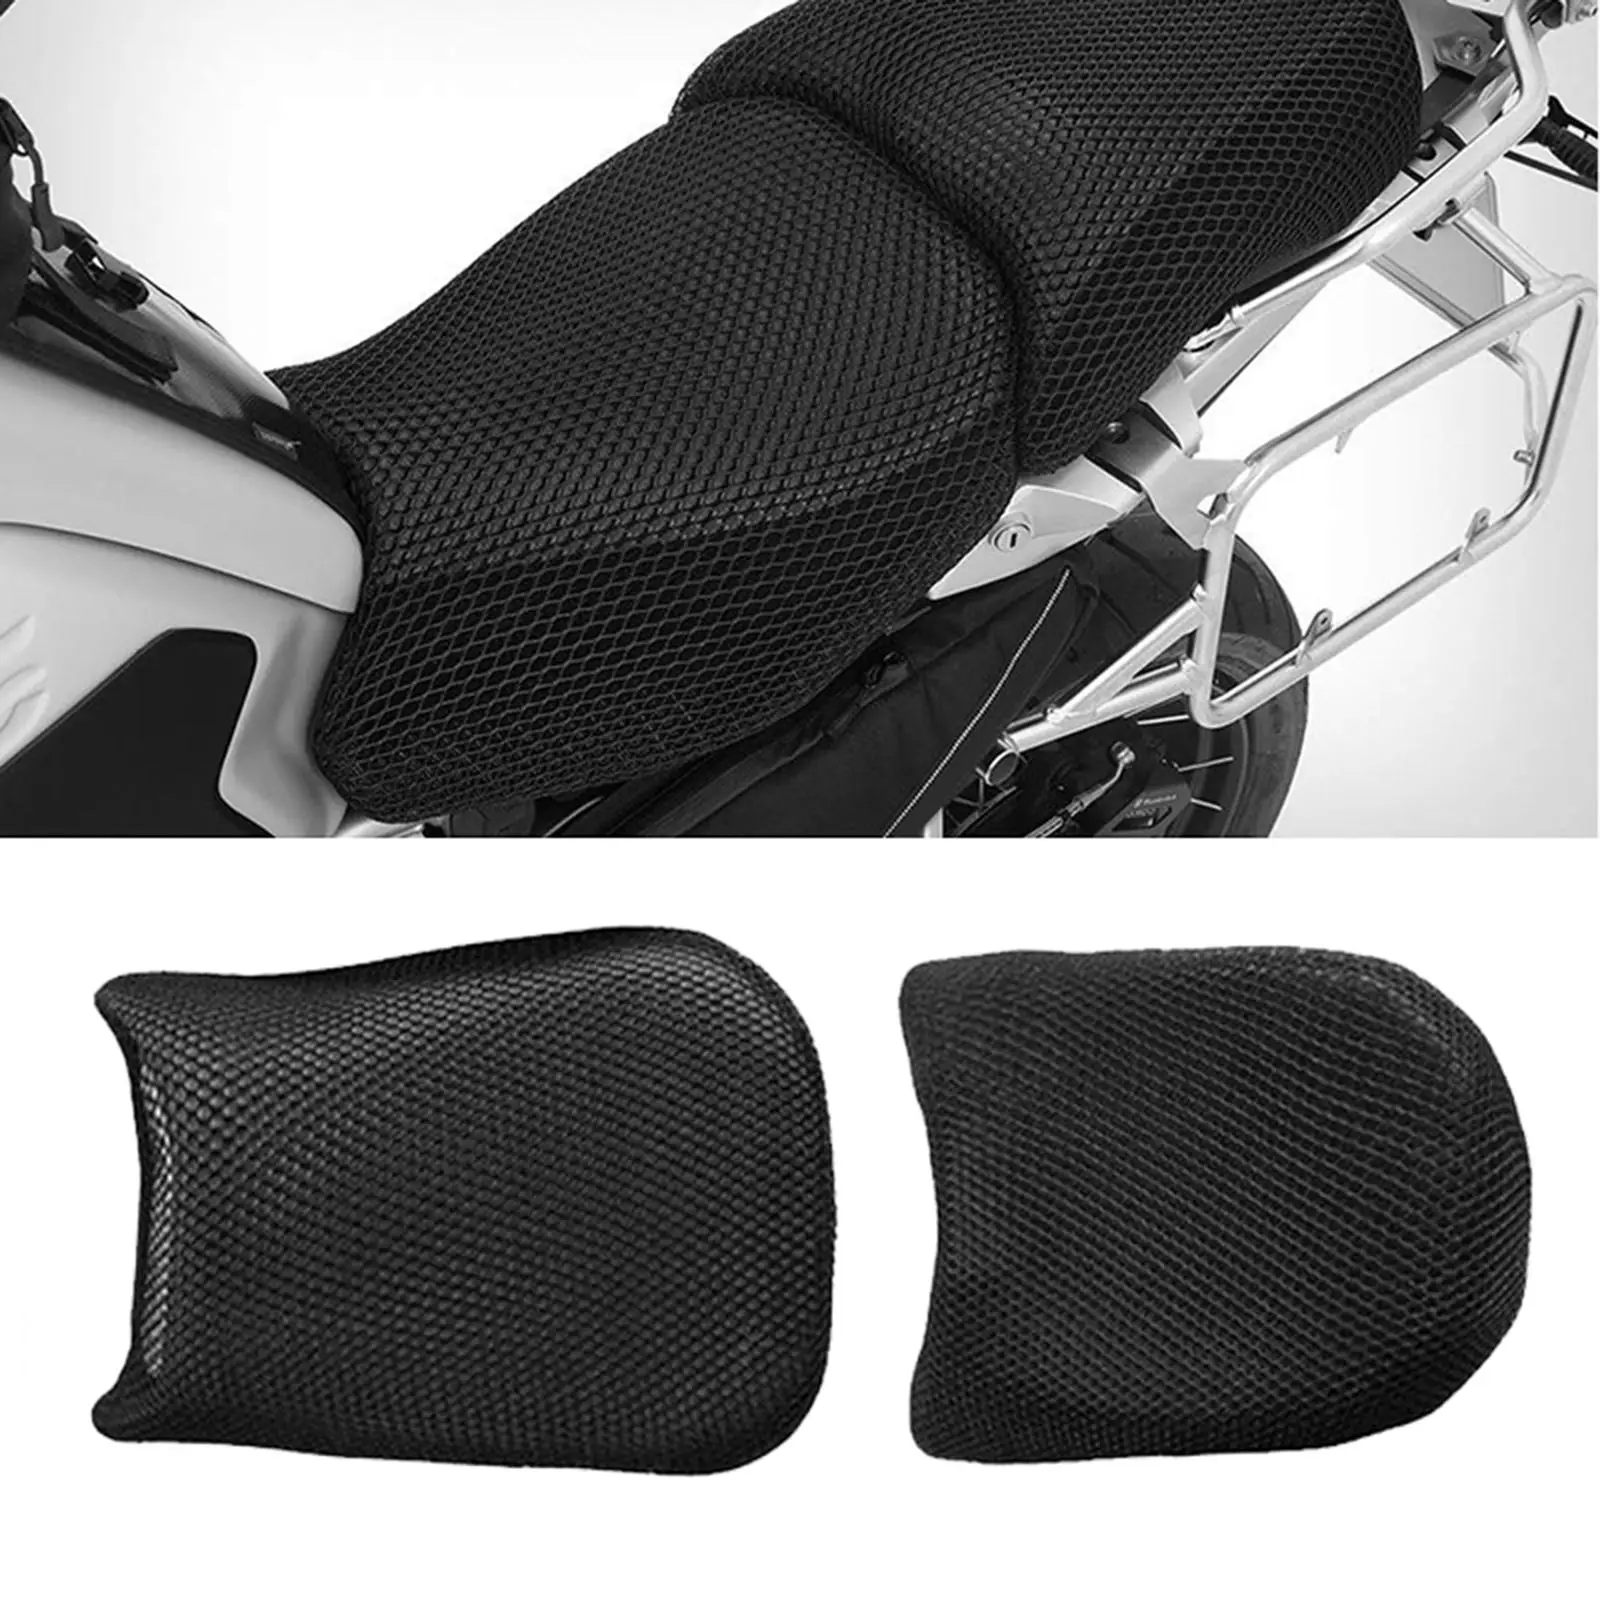 Motorbike Sport Motorcycle 3D Saddle Seat Cushions  Covers Pressure Relief Accessories For  R1200GS